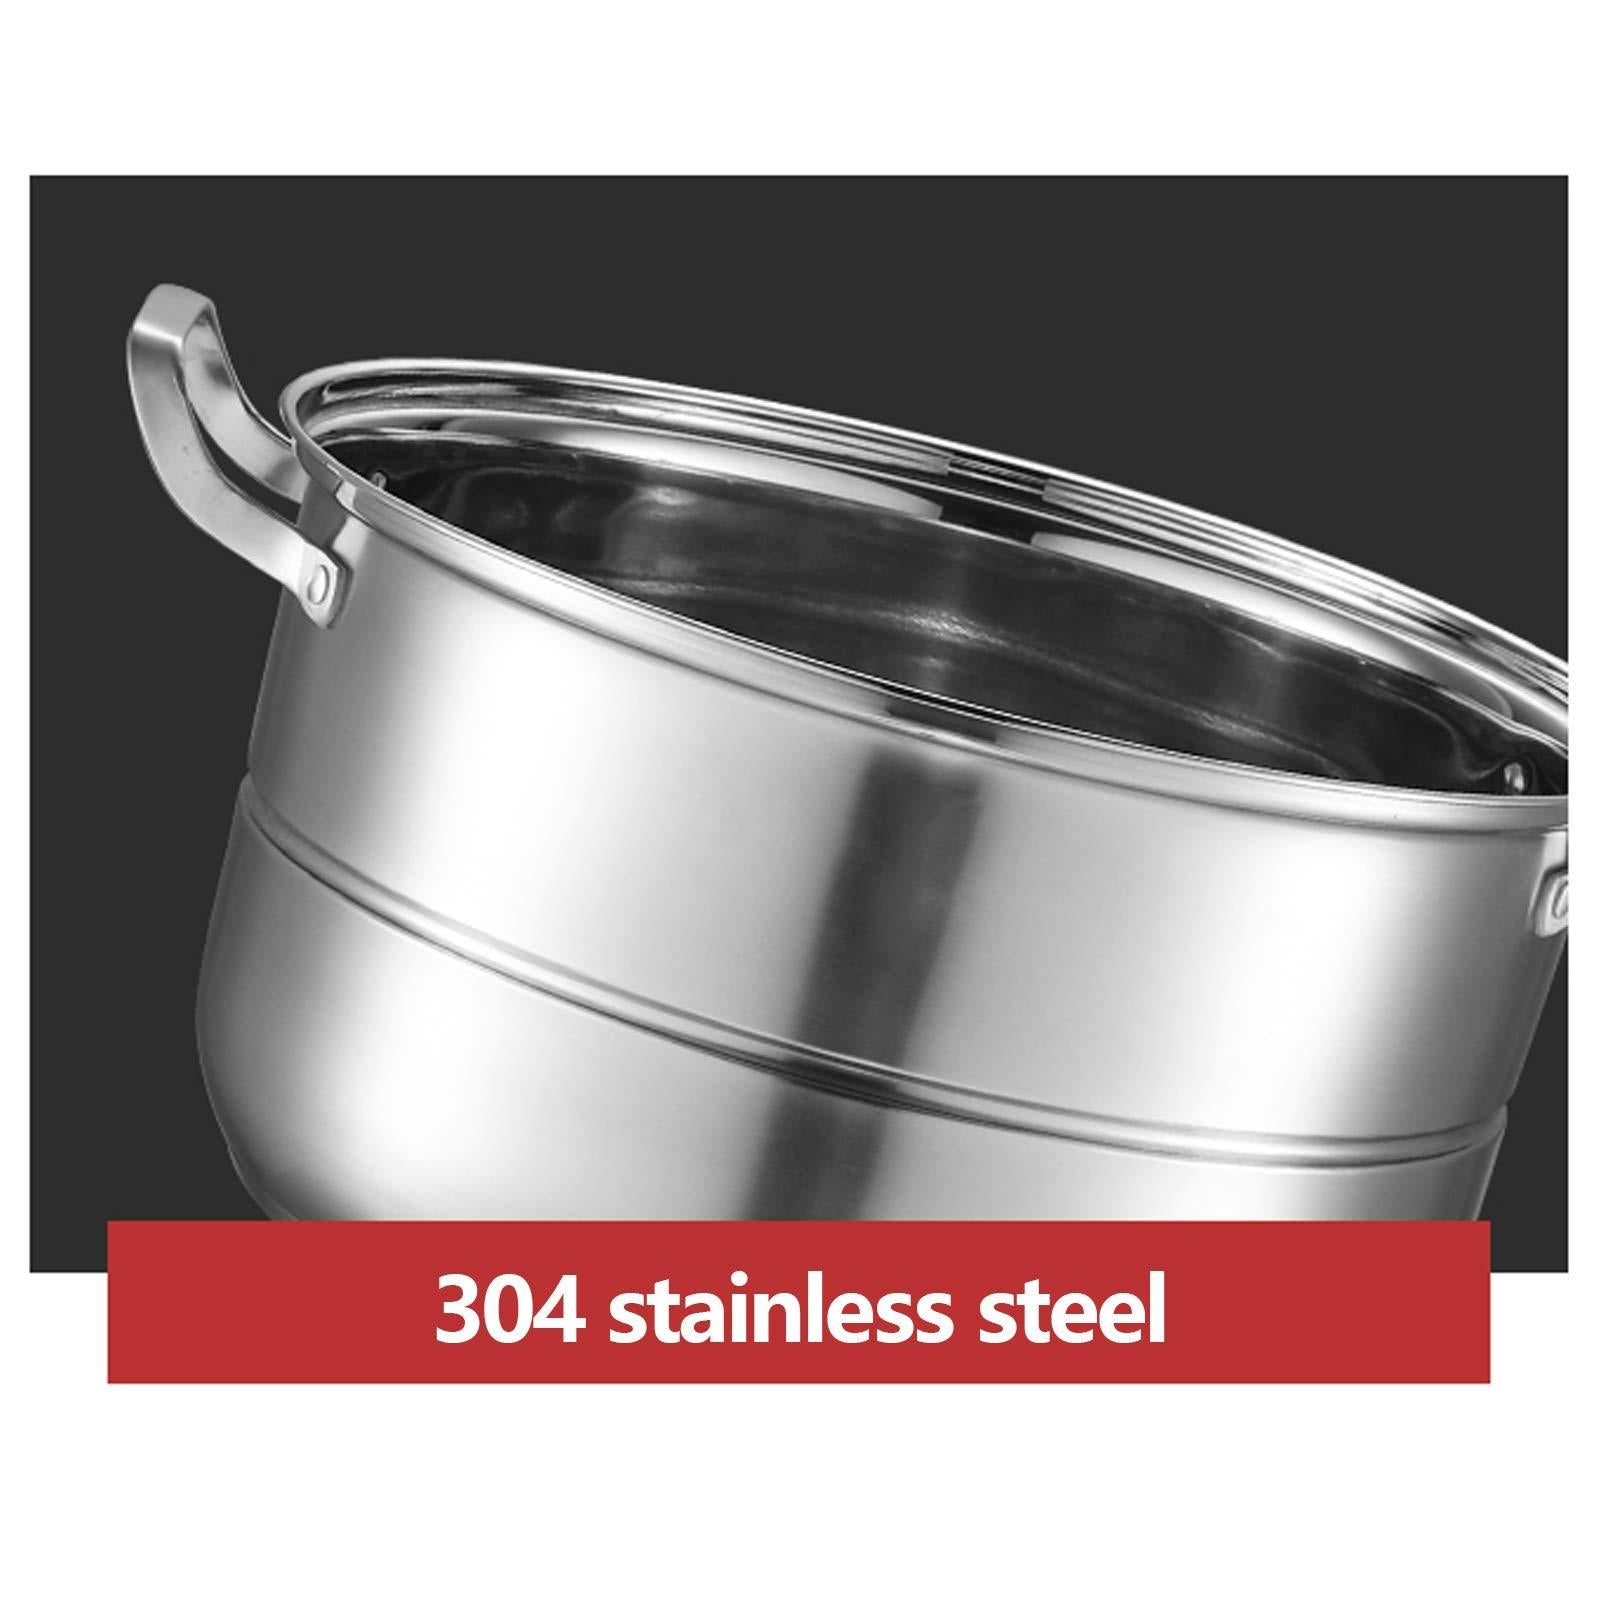 5-Layer Steamer Stackable Steam Cooker 304Stainless Steel Steamer